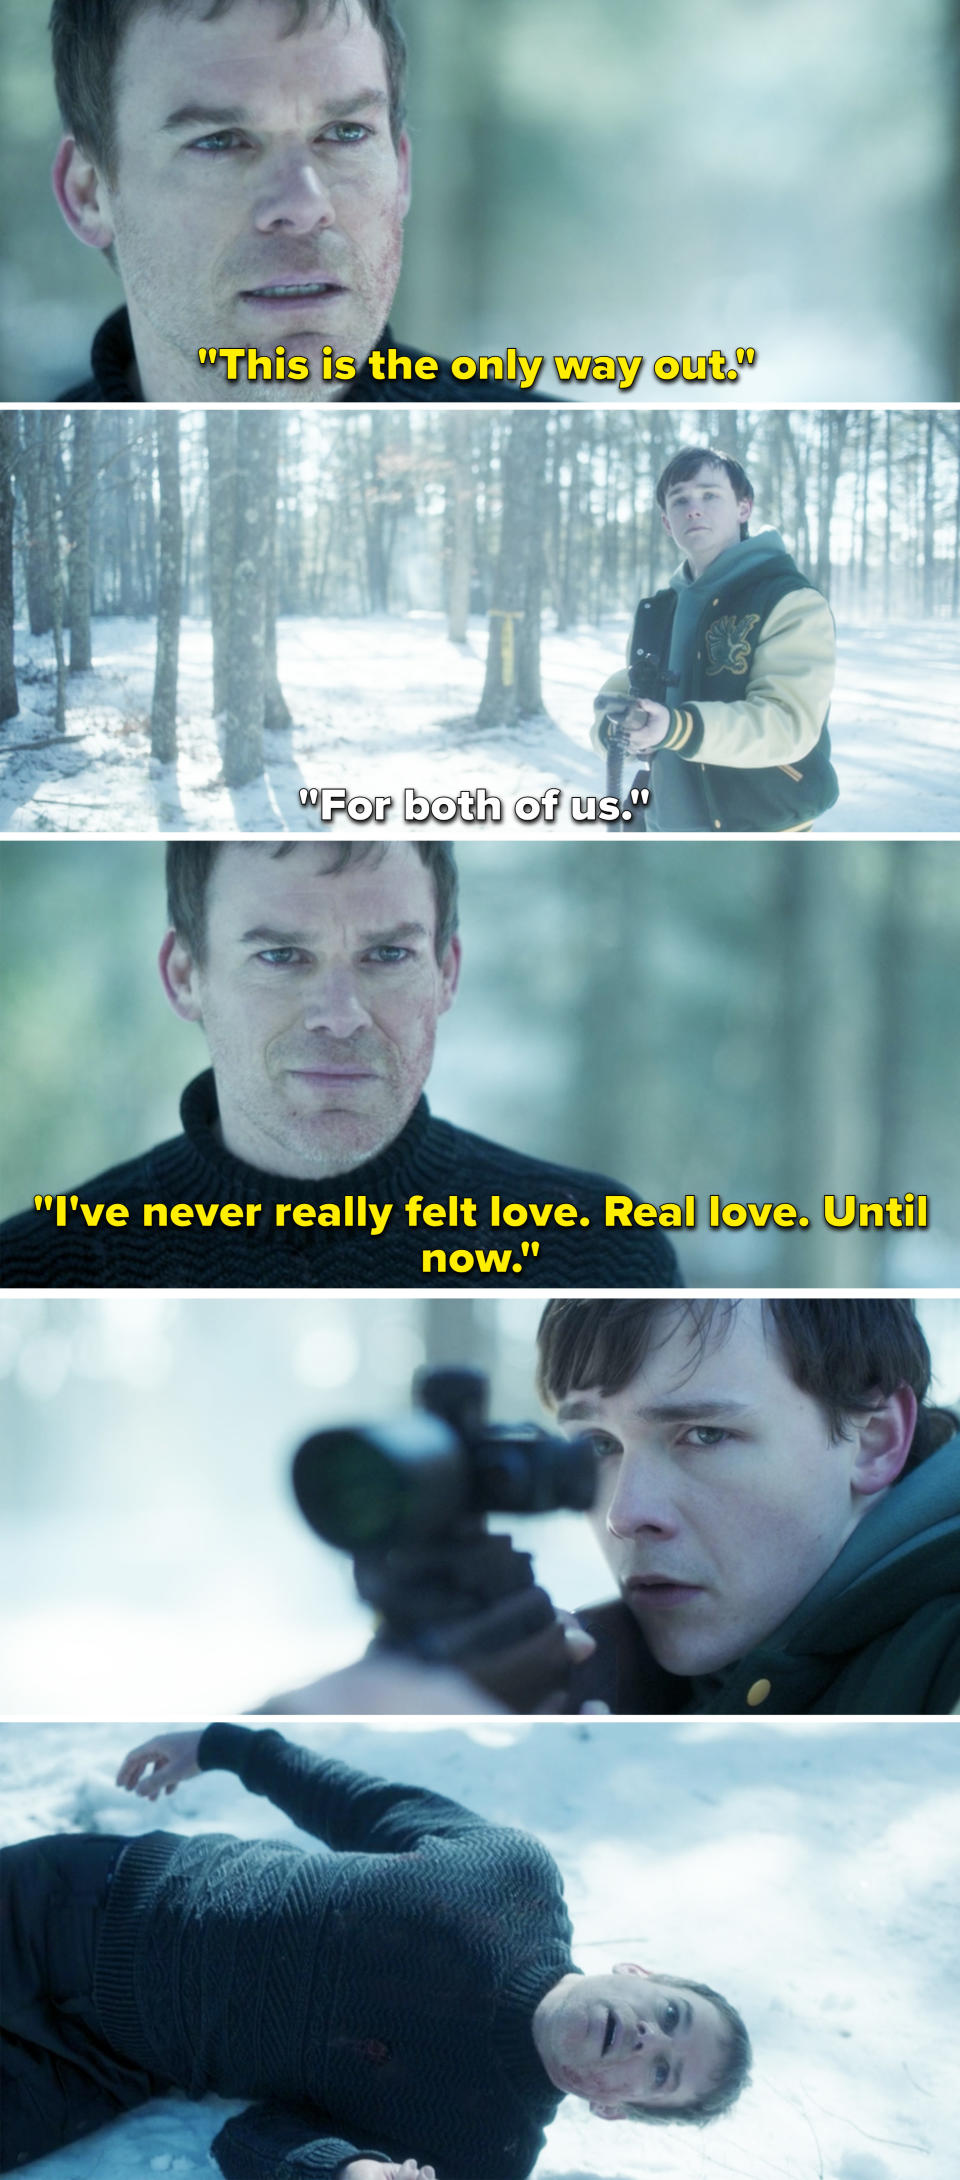 Dexter encouraging Harrison to shoot him and saying this is the first time he's felt love